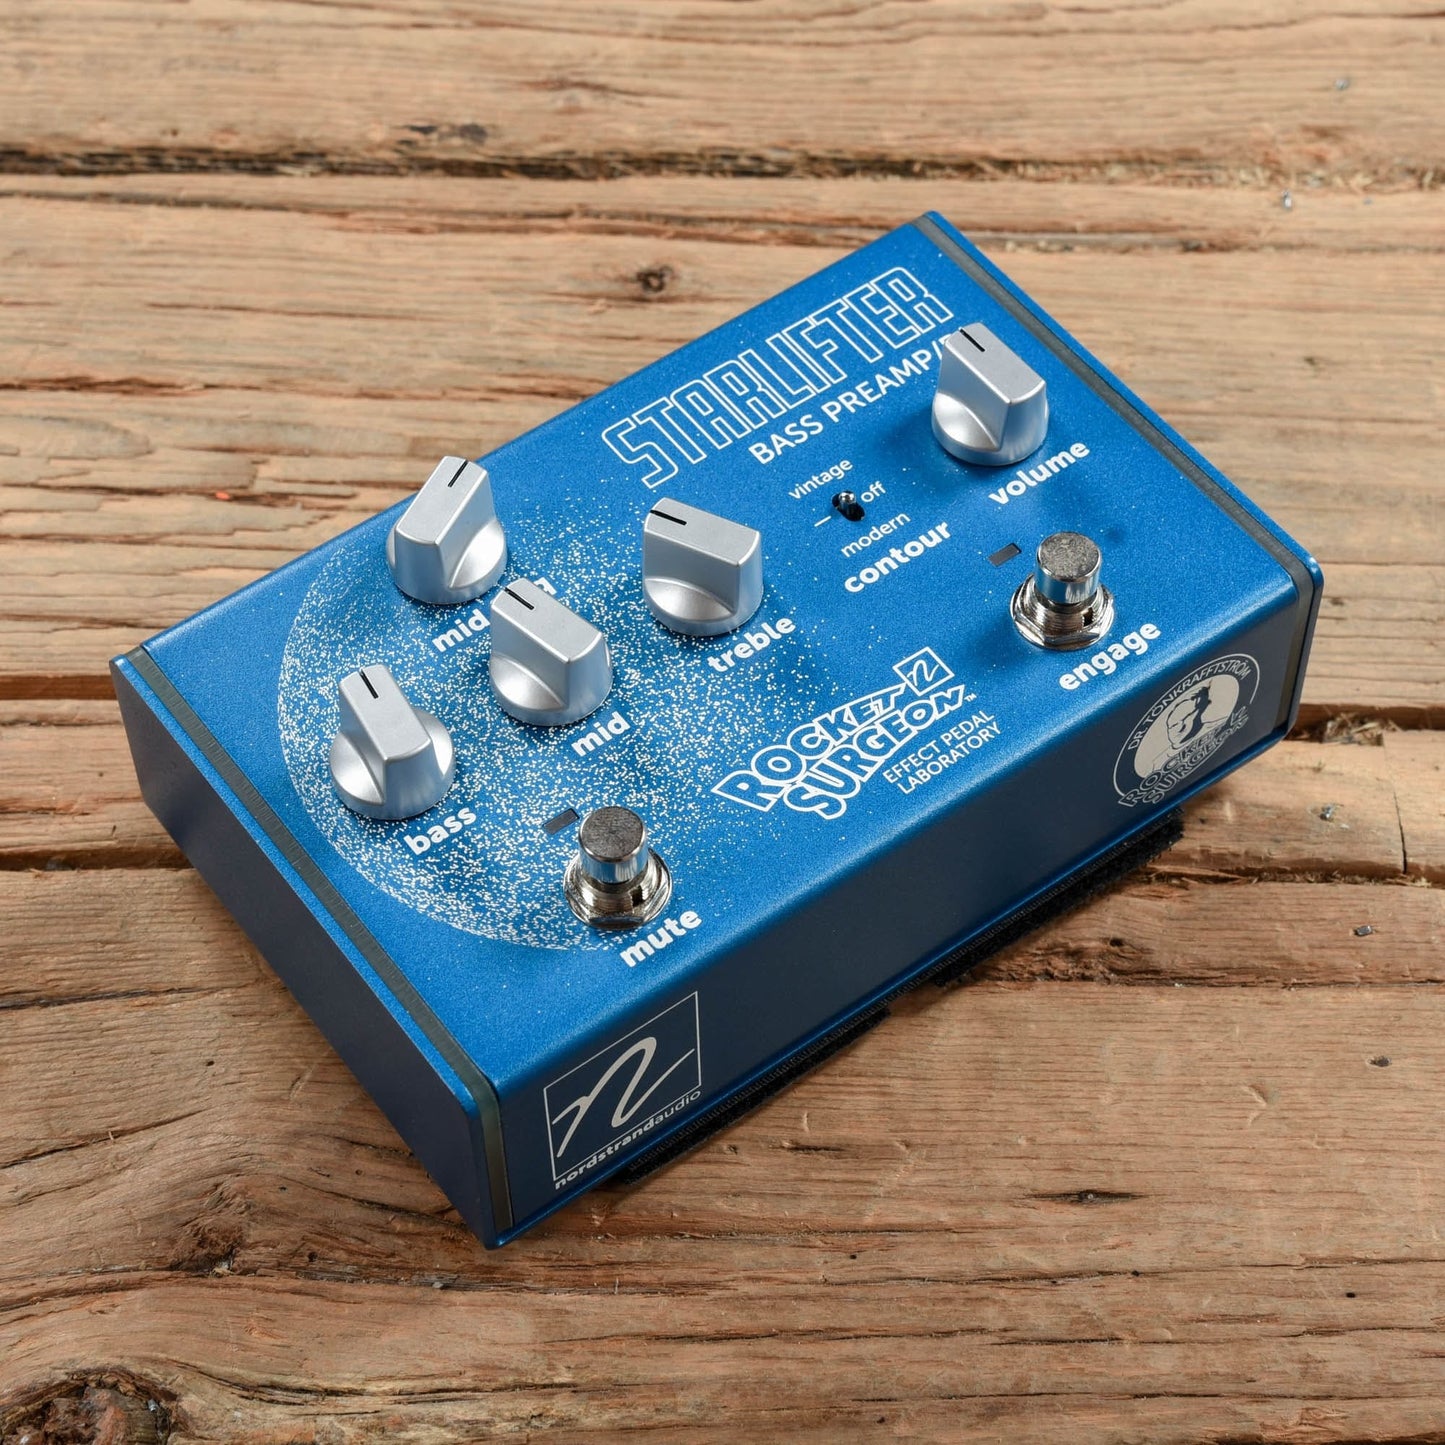 Nordstrand Starlifter Rocket Surgeon V2 Bass Preamp/DI Effects and Pedals / Amp Modeling